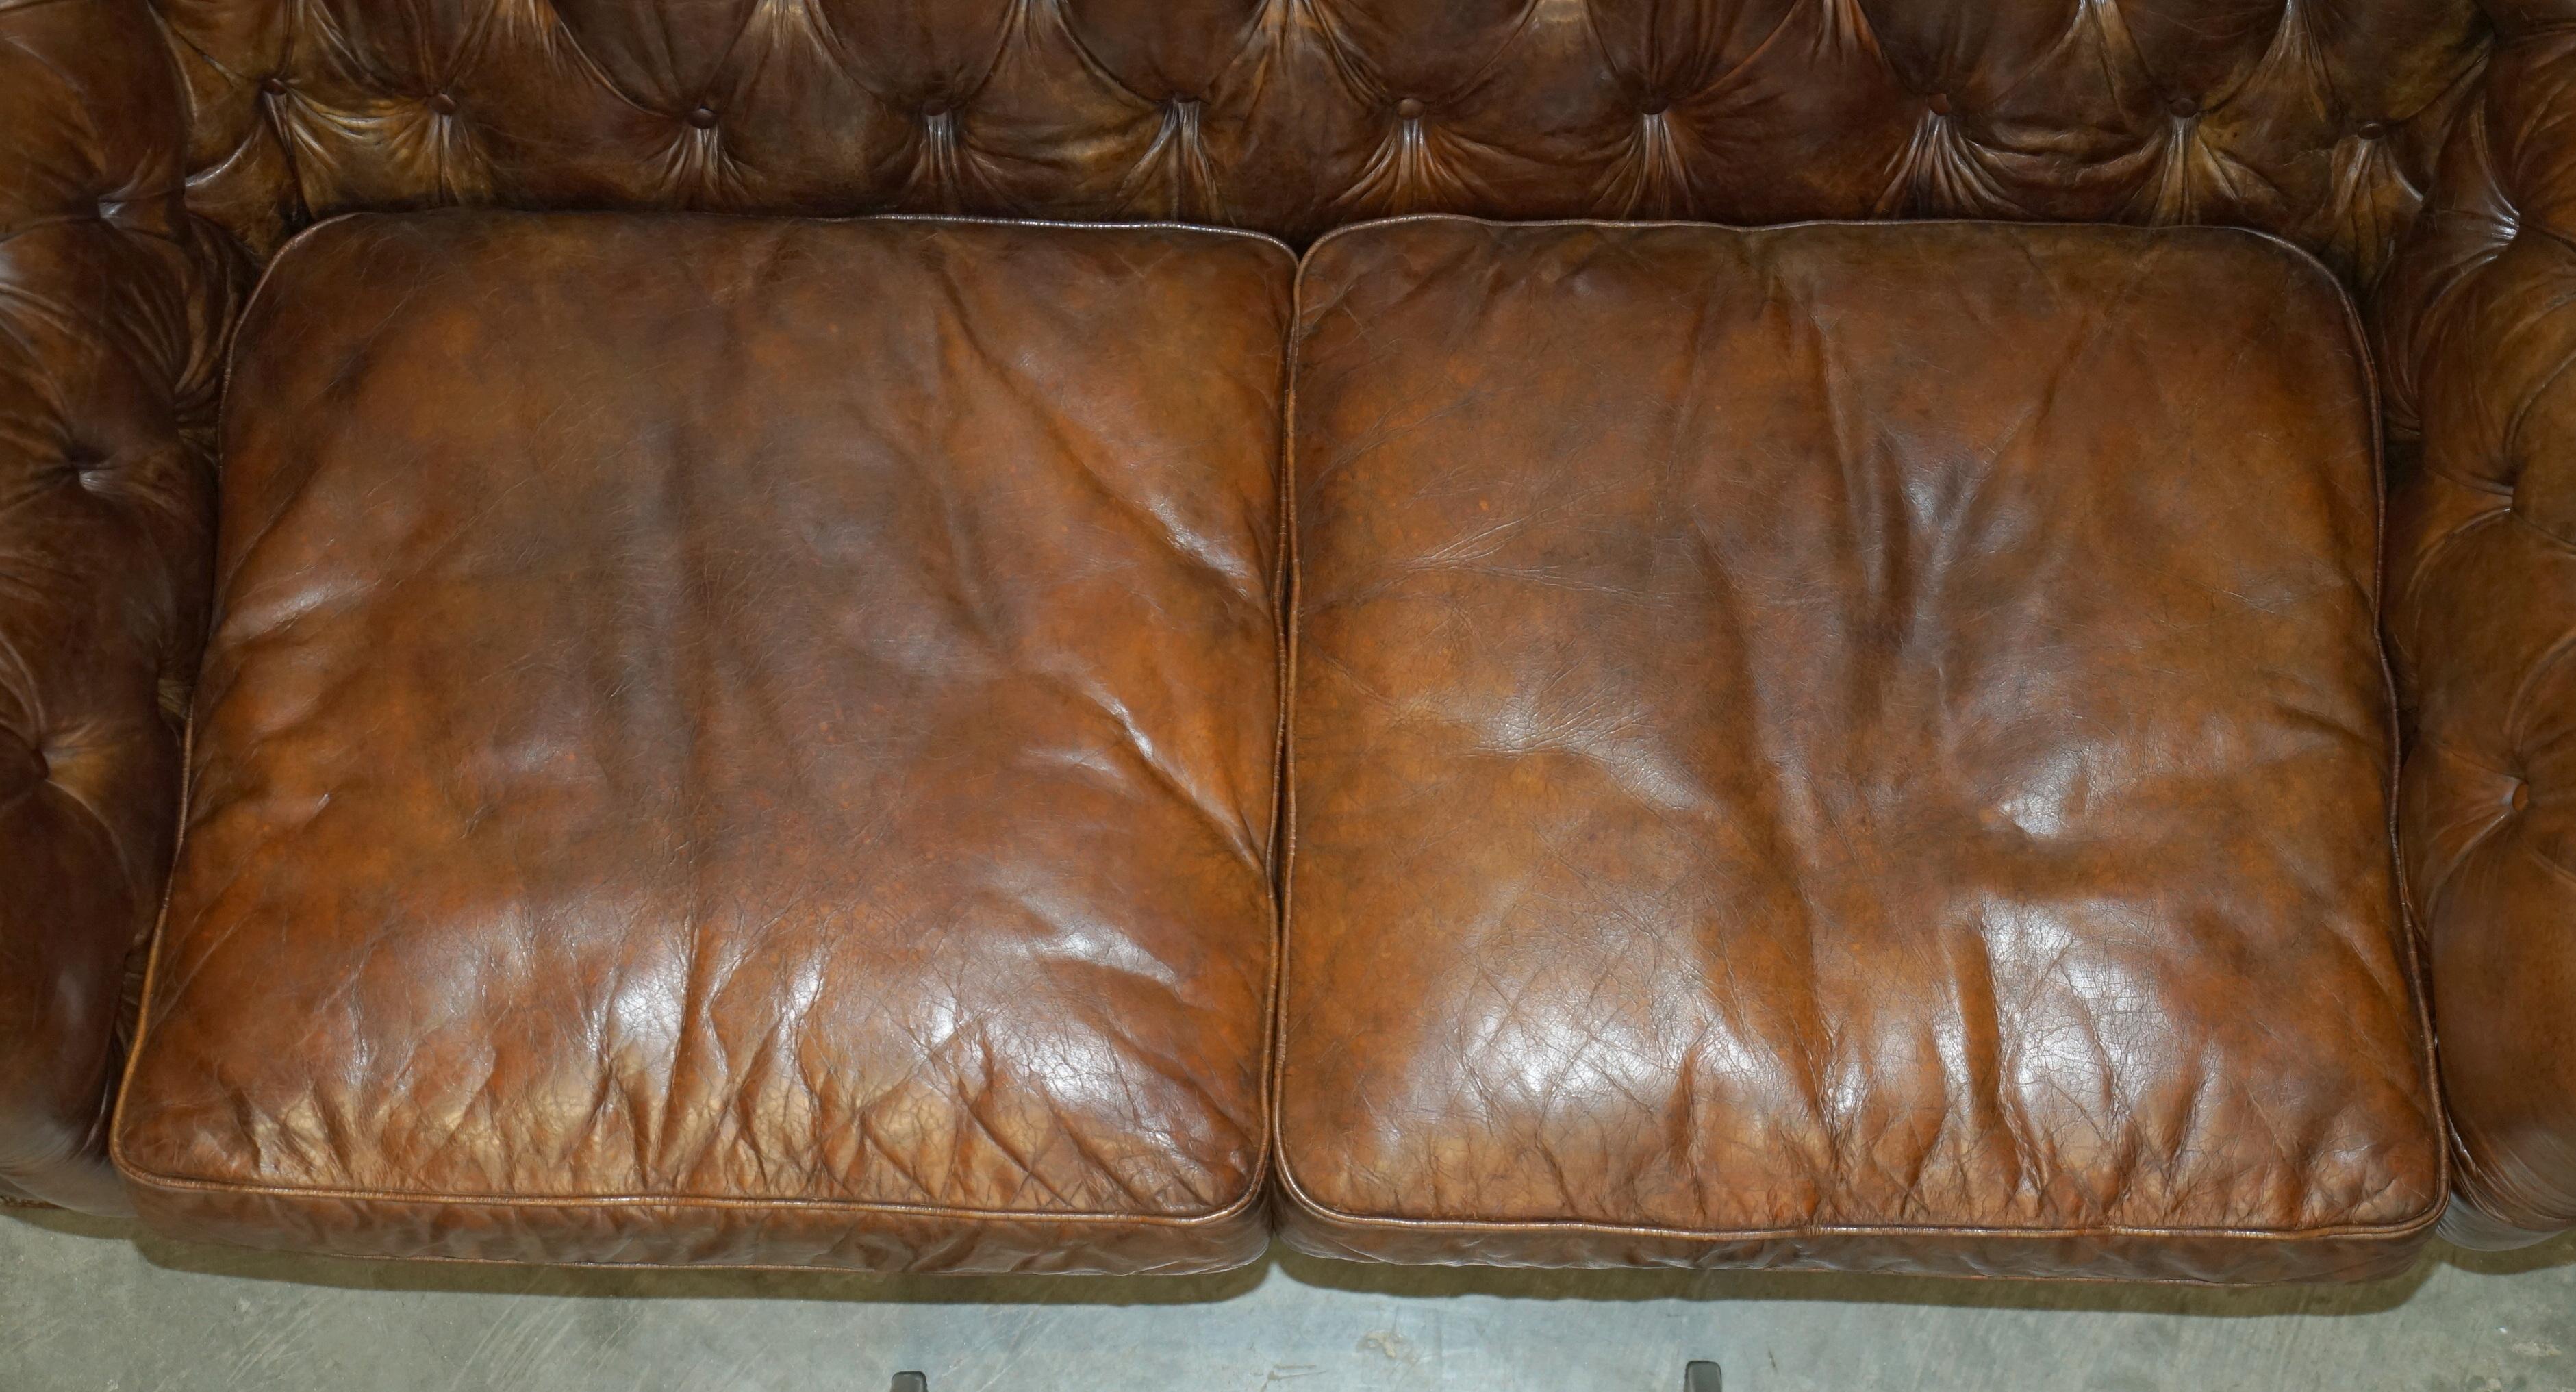 1 von 2 TIMOTHY OULTON HERITAGE BROWN OVERSIZED LEATHER CHESTERFIELD HALO SOFAs im Angebot 3